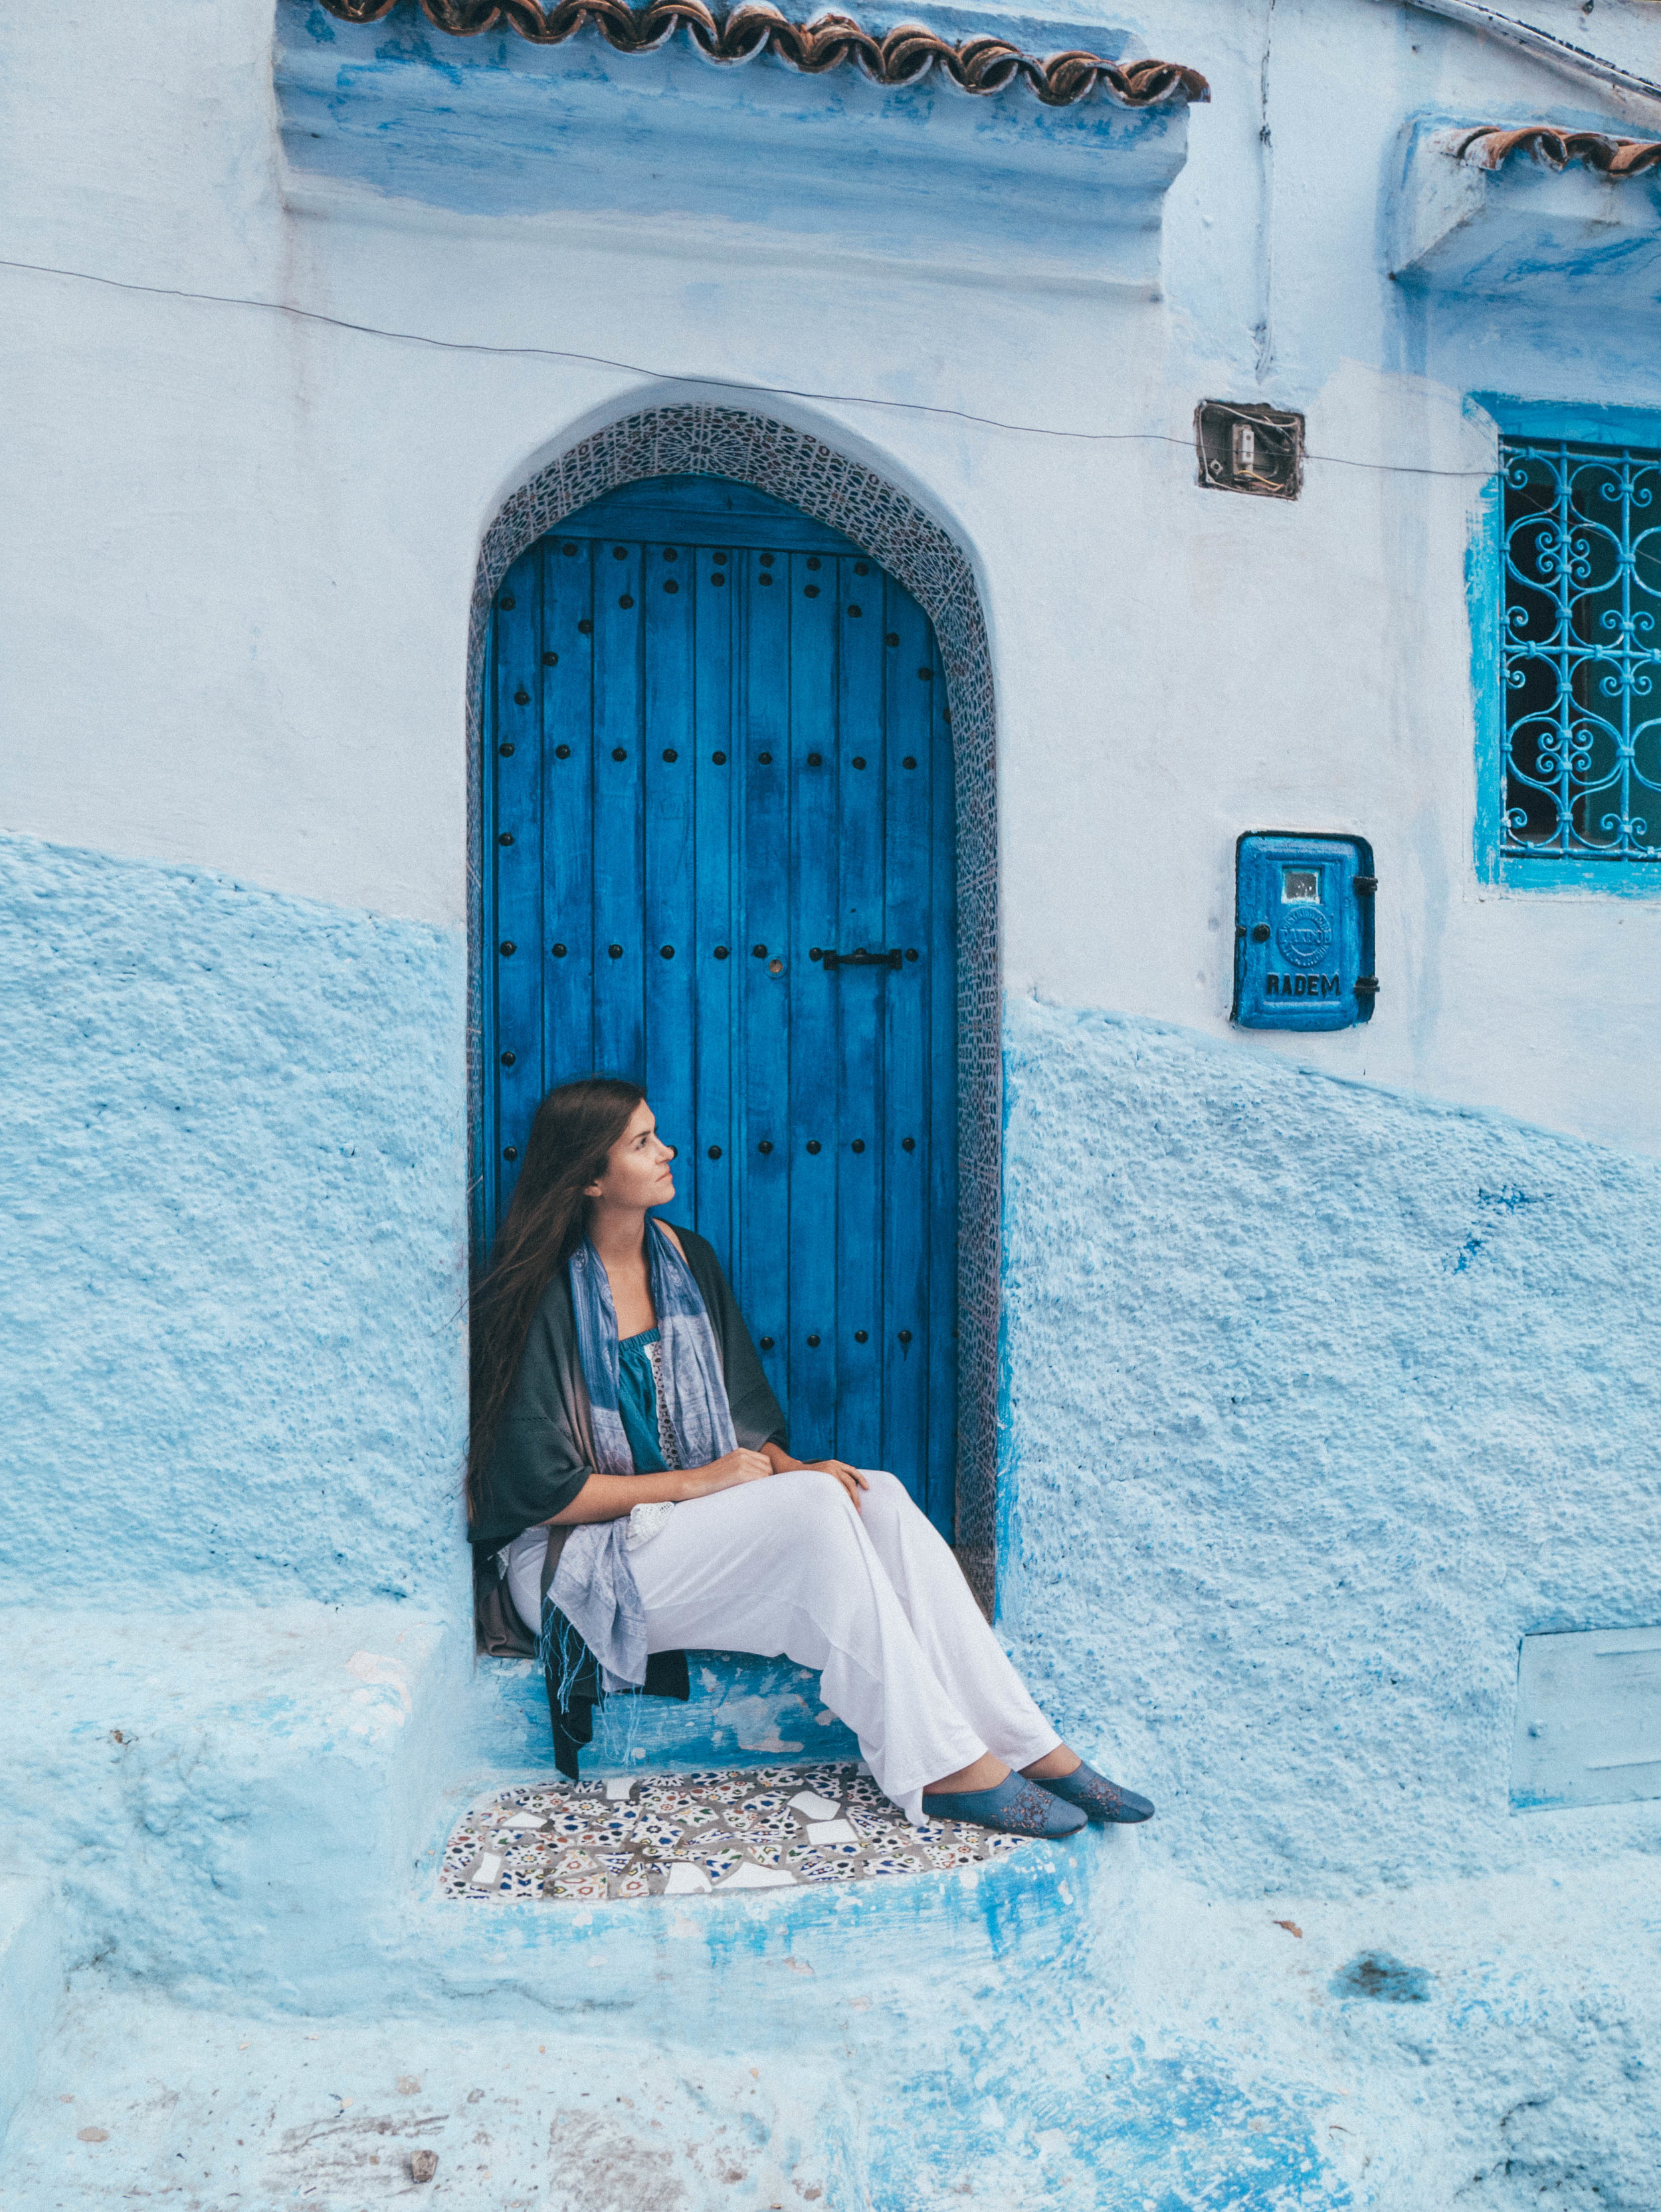 Me sitting on someone's door - Chefchaouen - Morocco